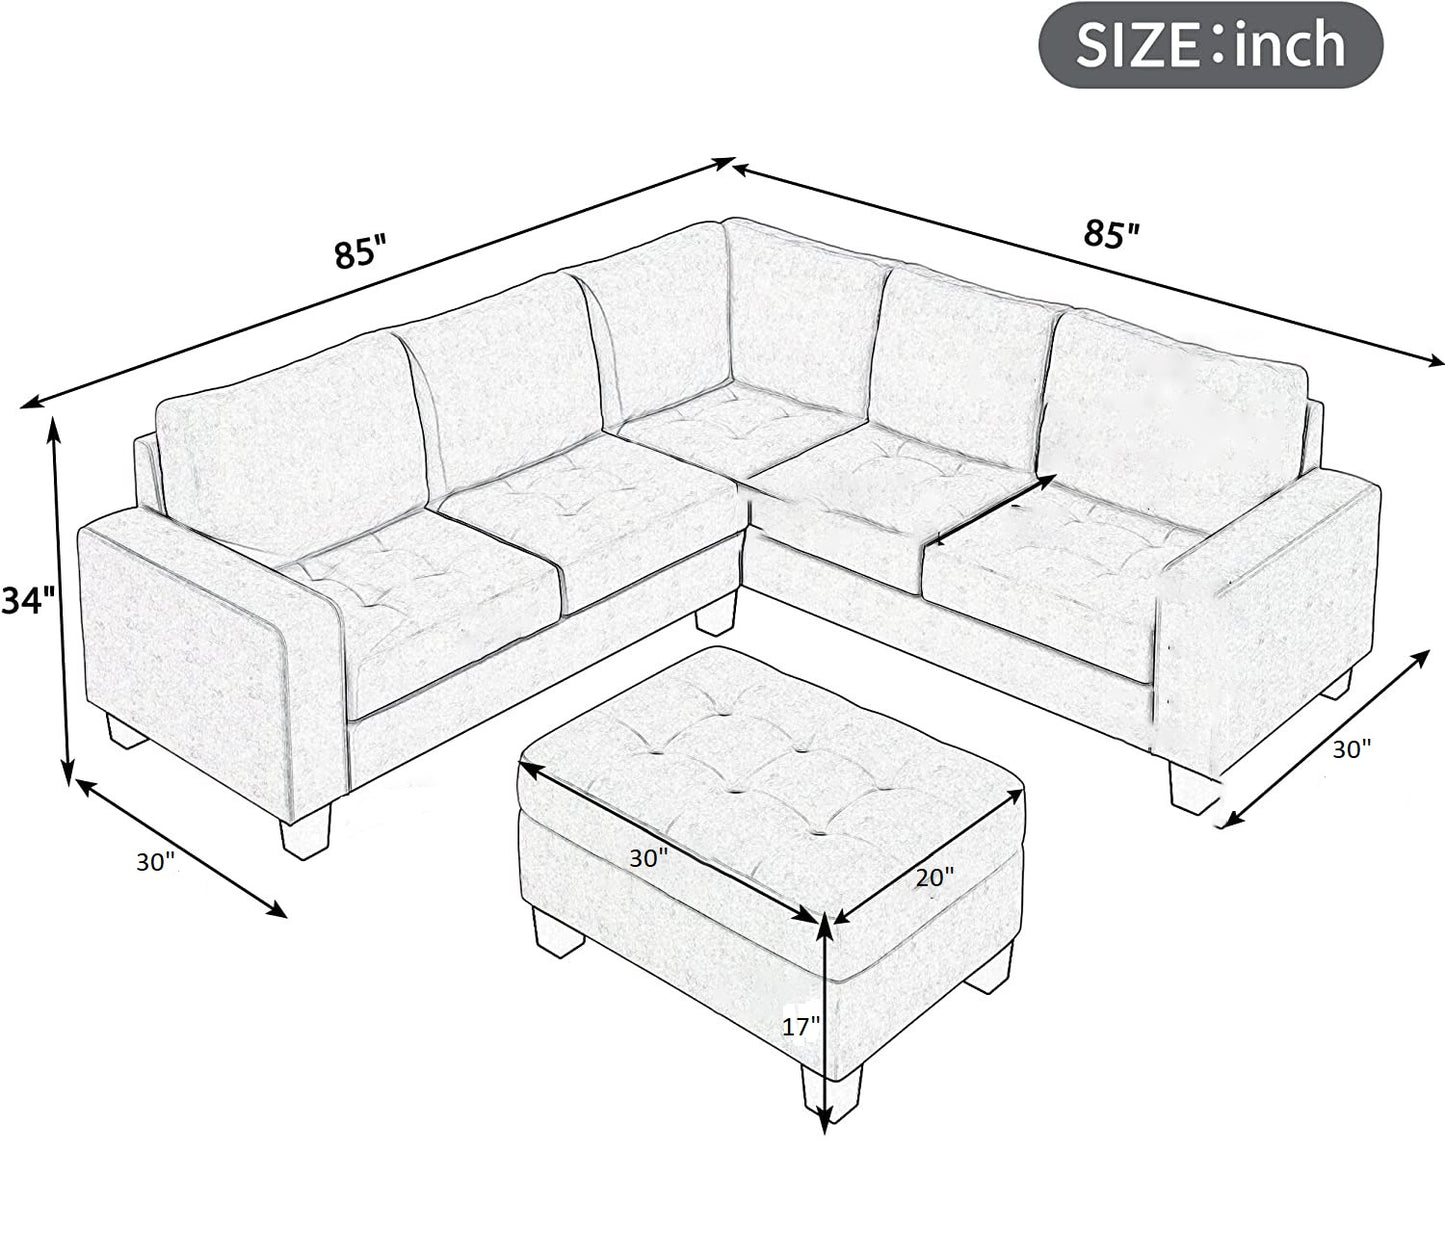 Christopher 5 Seater L Shape Fabric Sofa With Ottoman